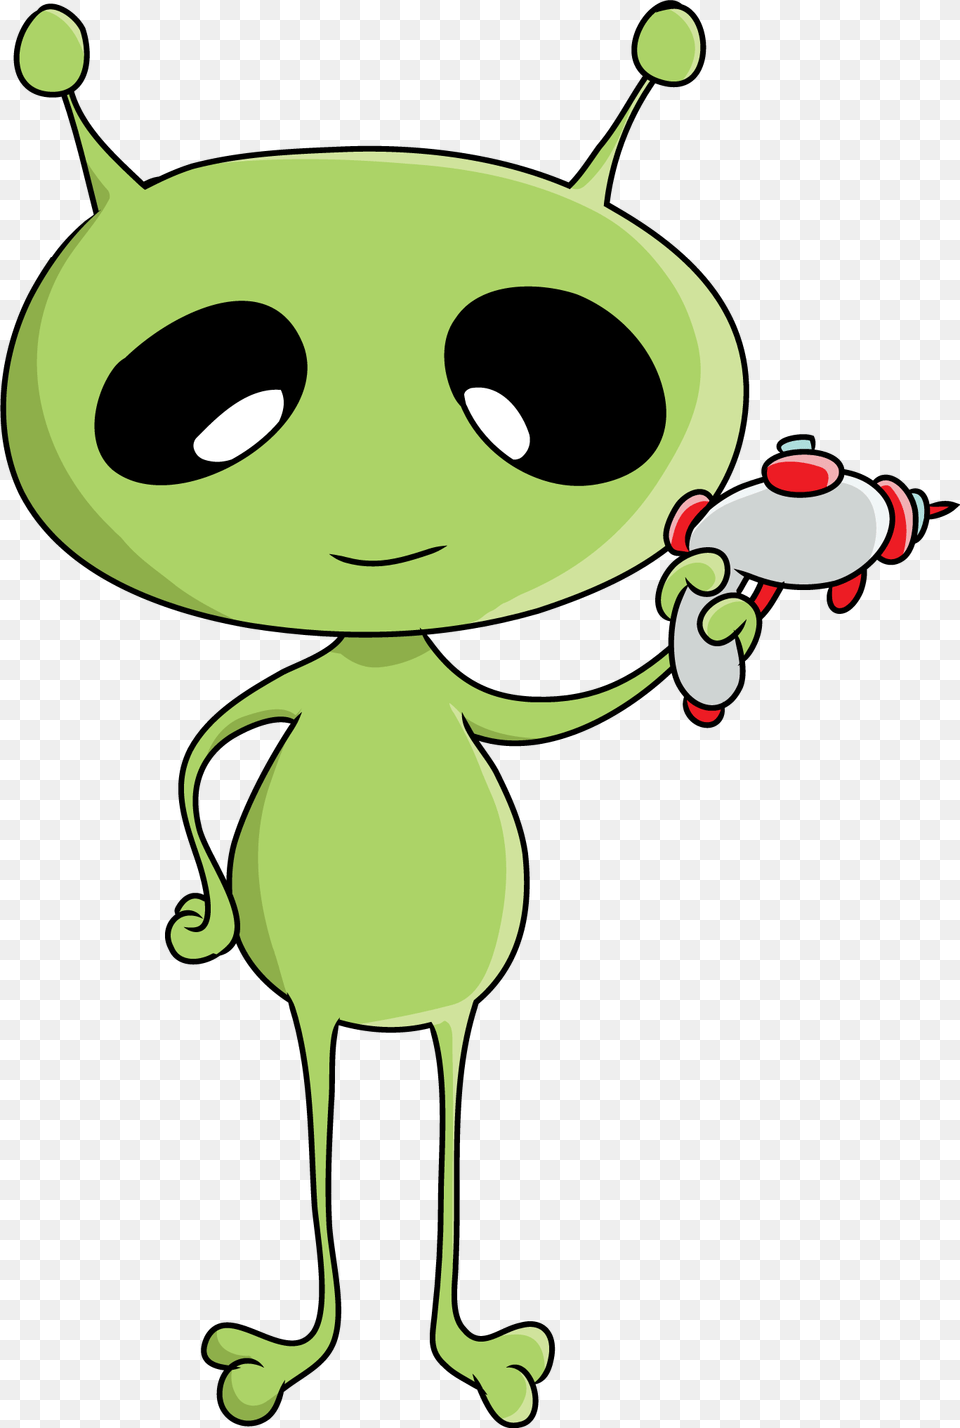 According To Ancient Alien The Exponent, Cartoon, Green, Baby, Person Png Image